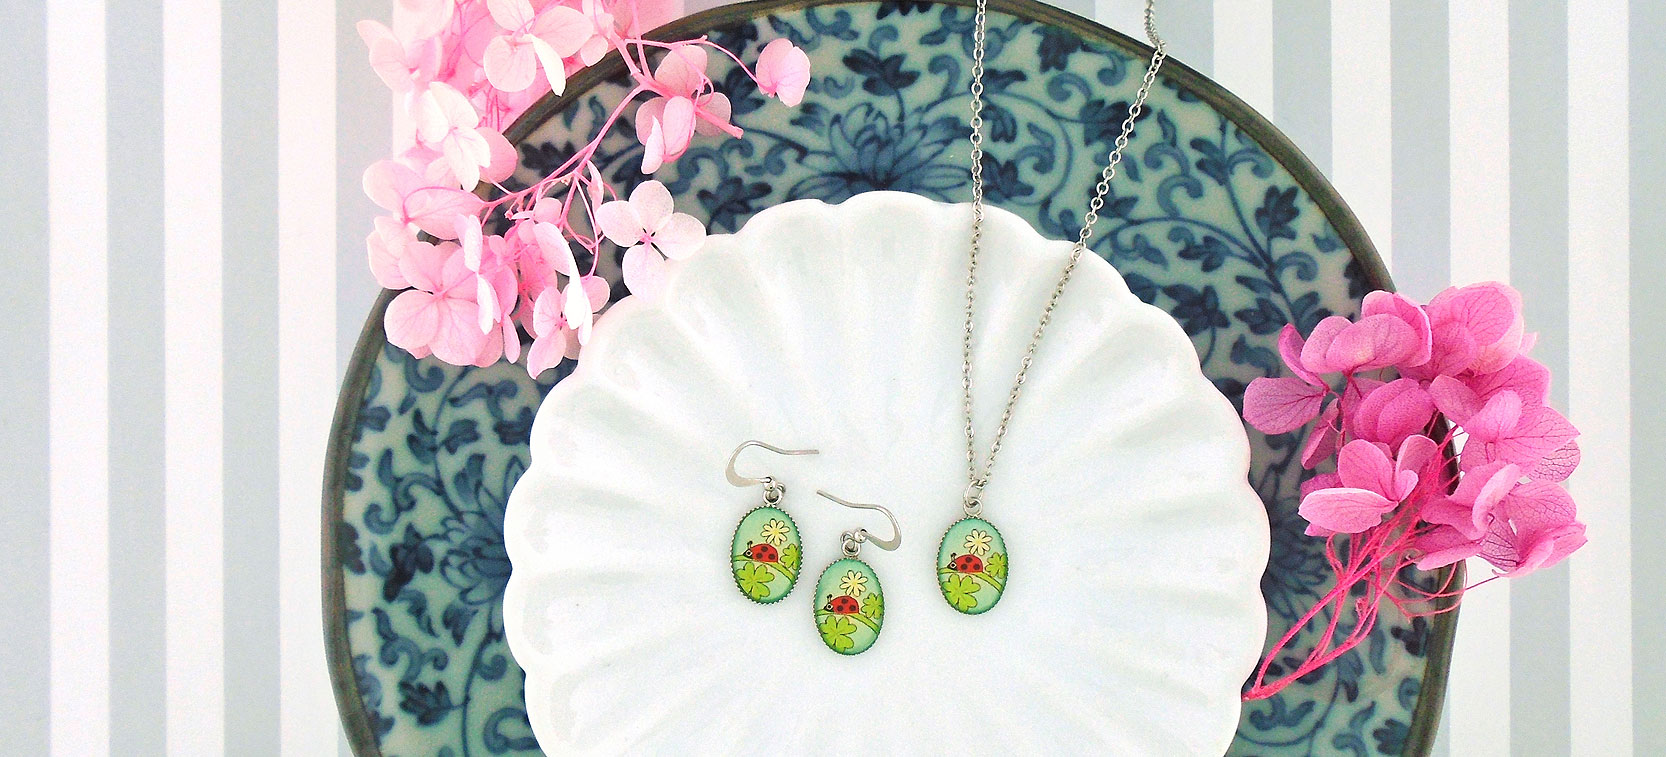 LAVISHY design and wholesale good luck/lucky ladybug themed vegan accessories and gfits to gift shops, boutiques and book stores in Canada, USA and worldwide.